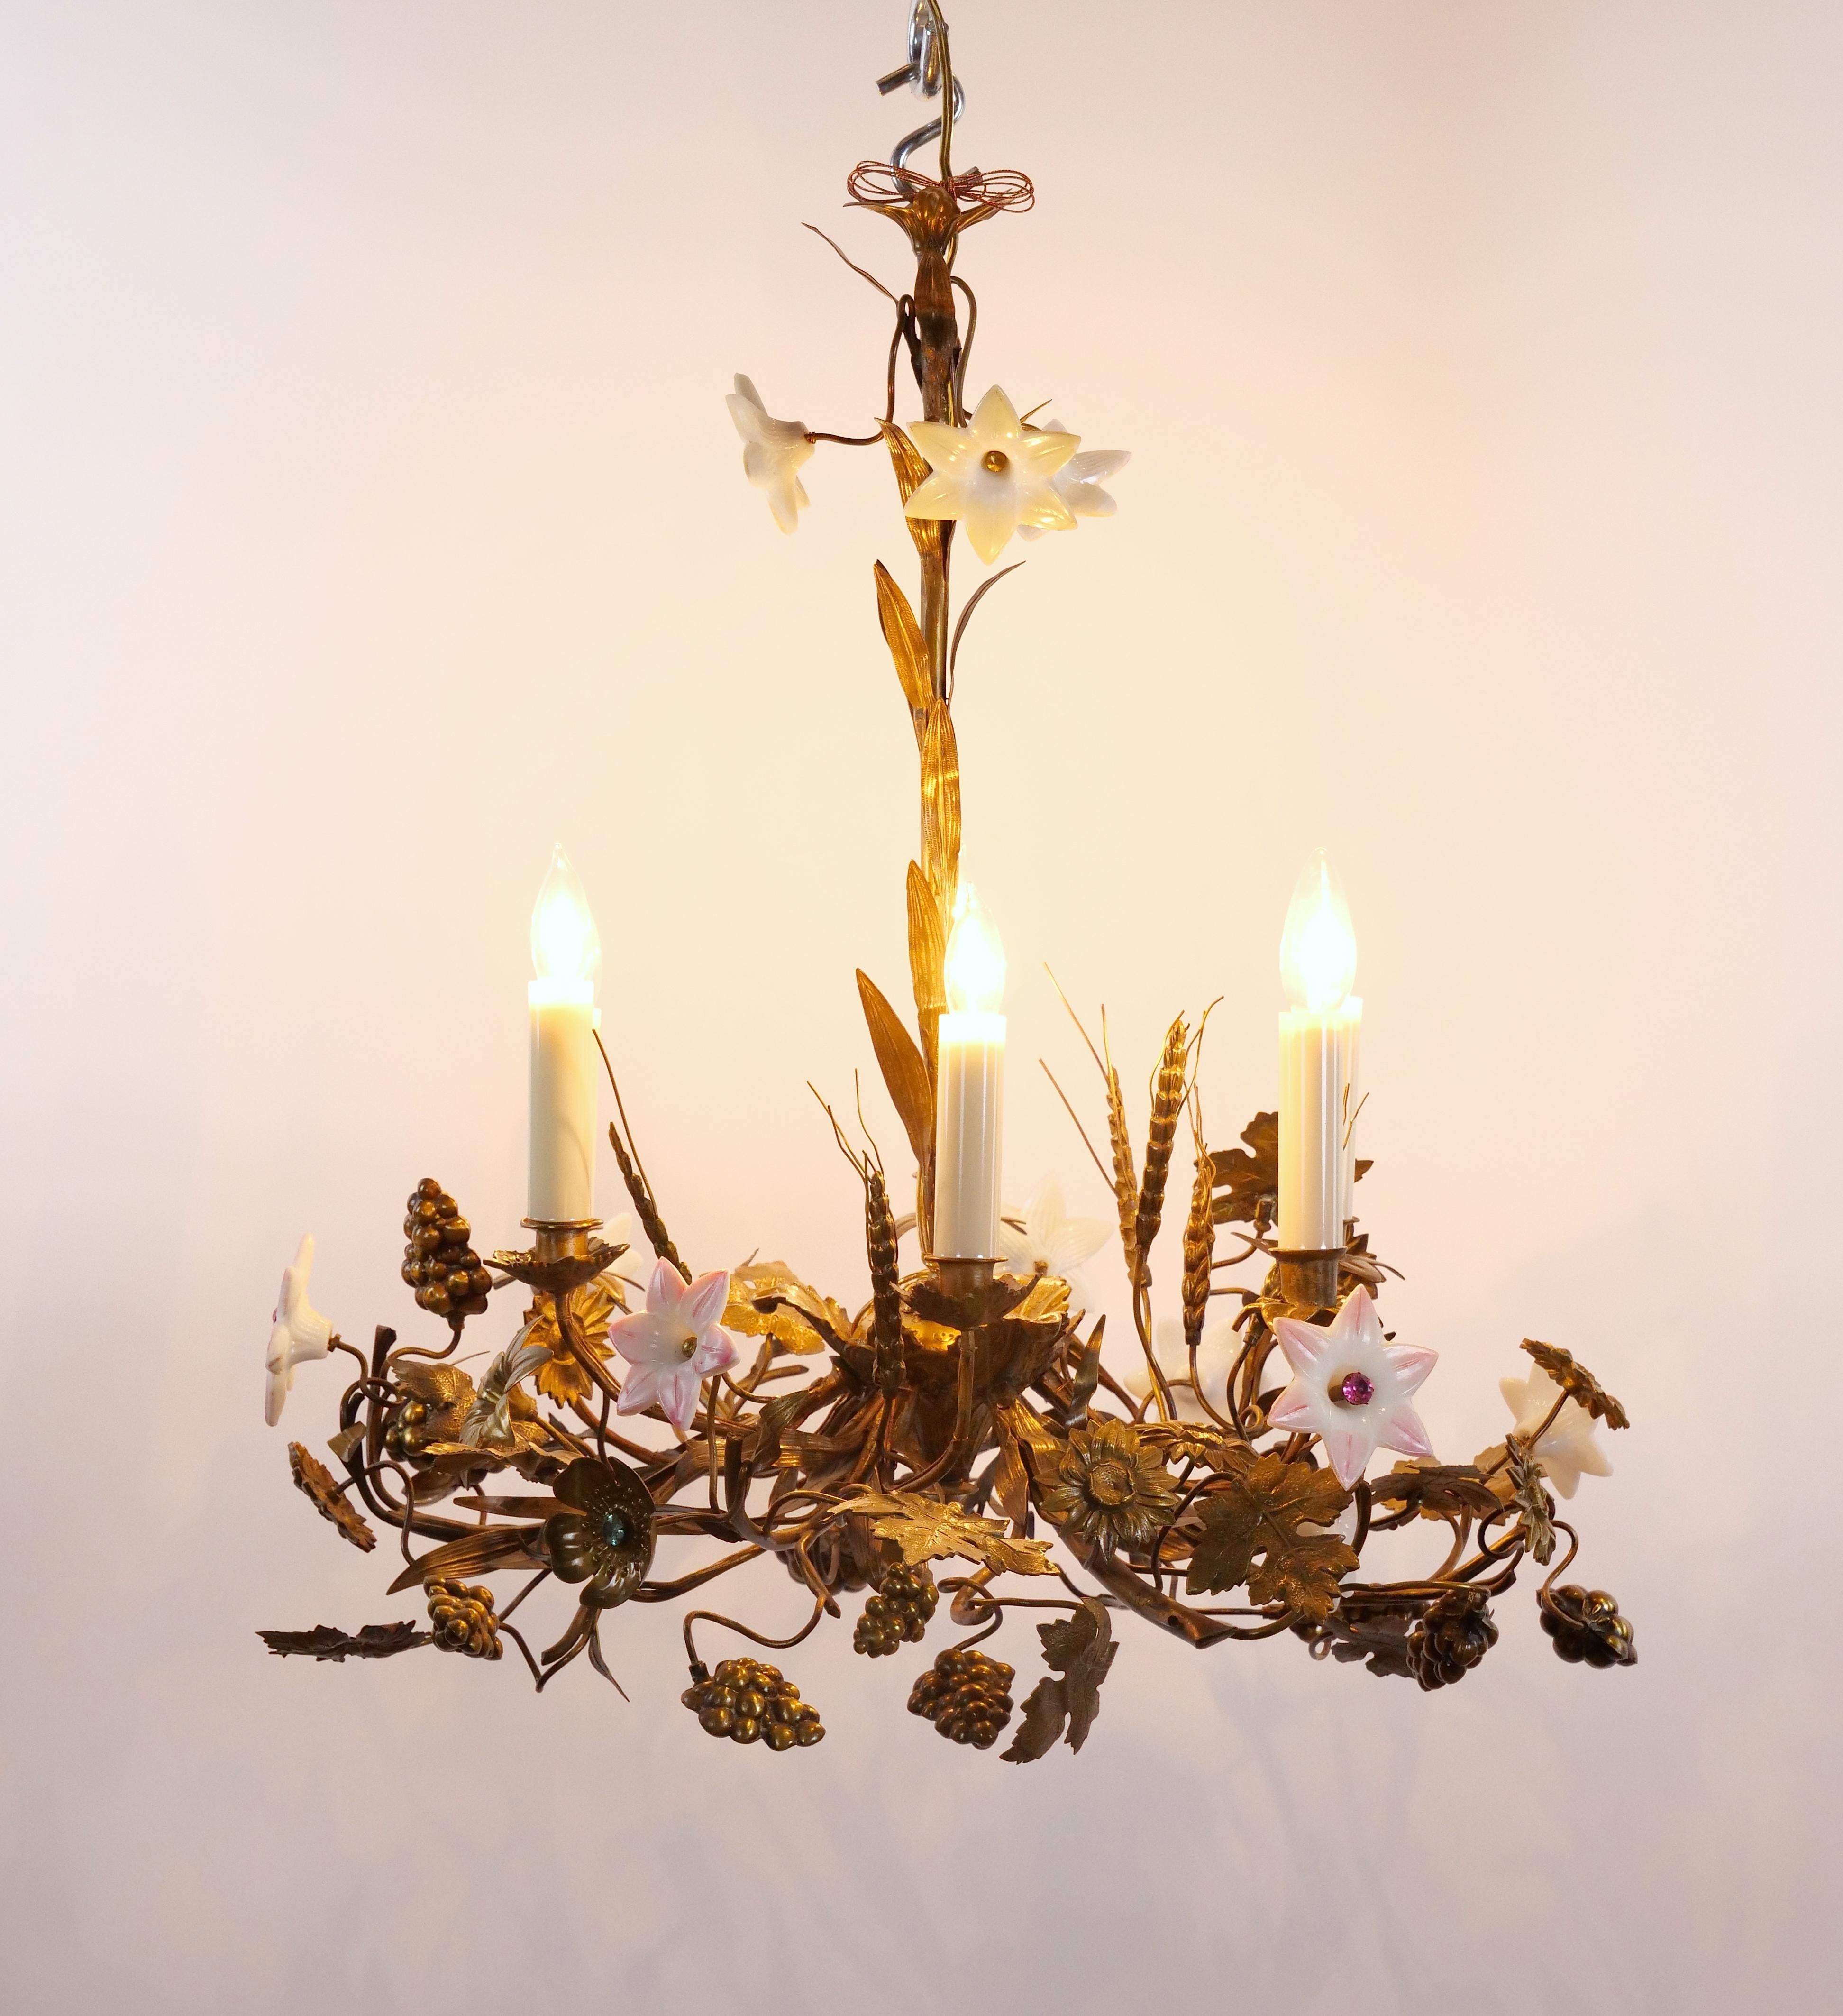 Extraordinary and exceptionally rare antique chandelier, meticulously handcrafted from brass and various metals. This masterpiece showcases exquisite clusters of grapes, intricately detailed grapevine leaves, and an assortment of meticulously